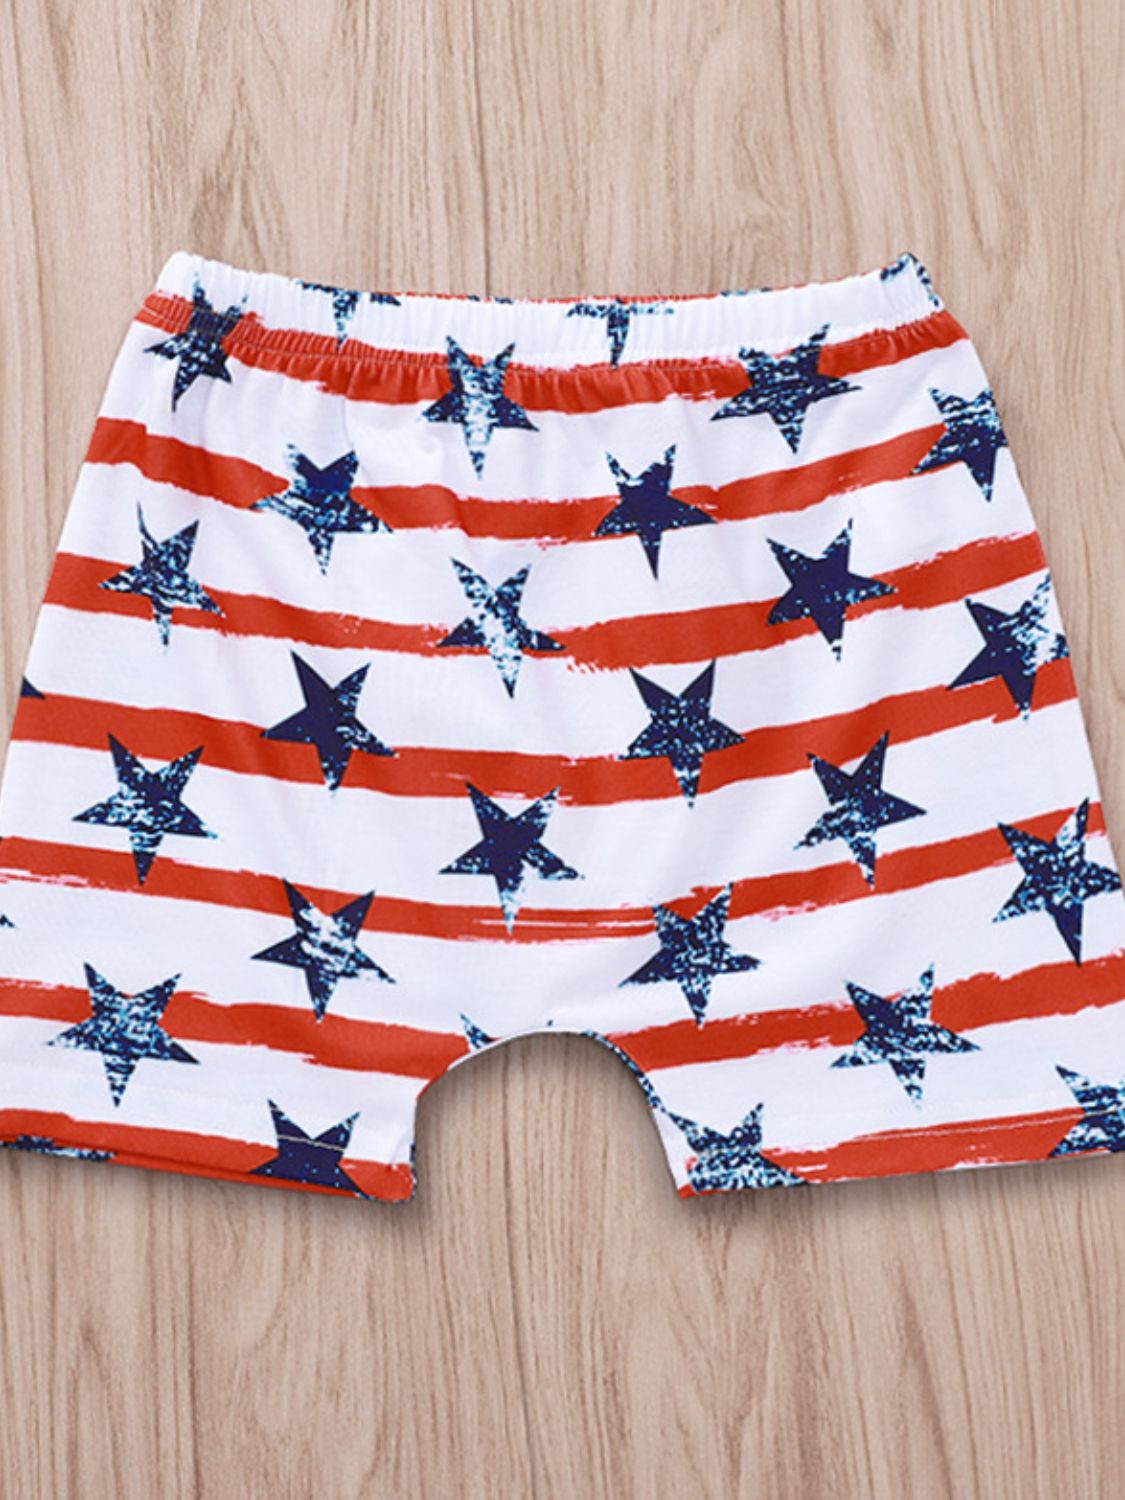 Children’s Boys Graphic Tank and US Flag Shorts Set